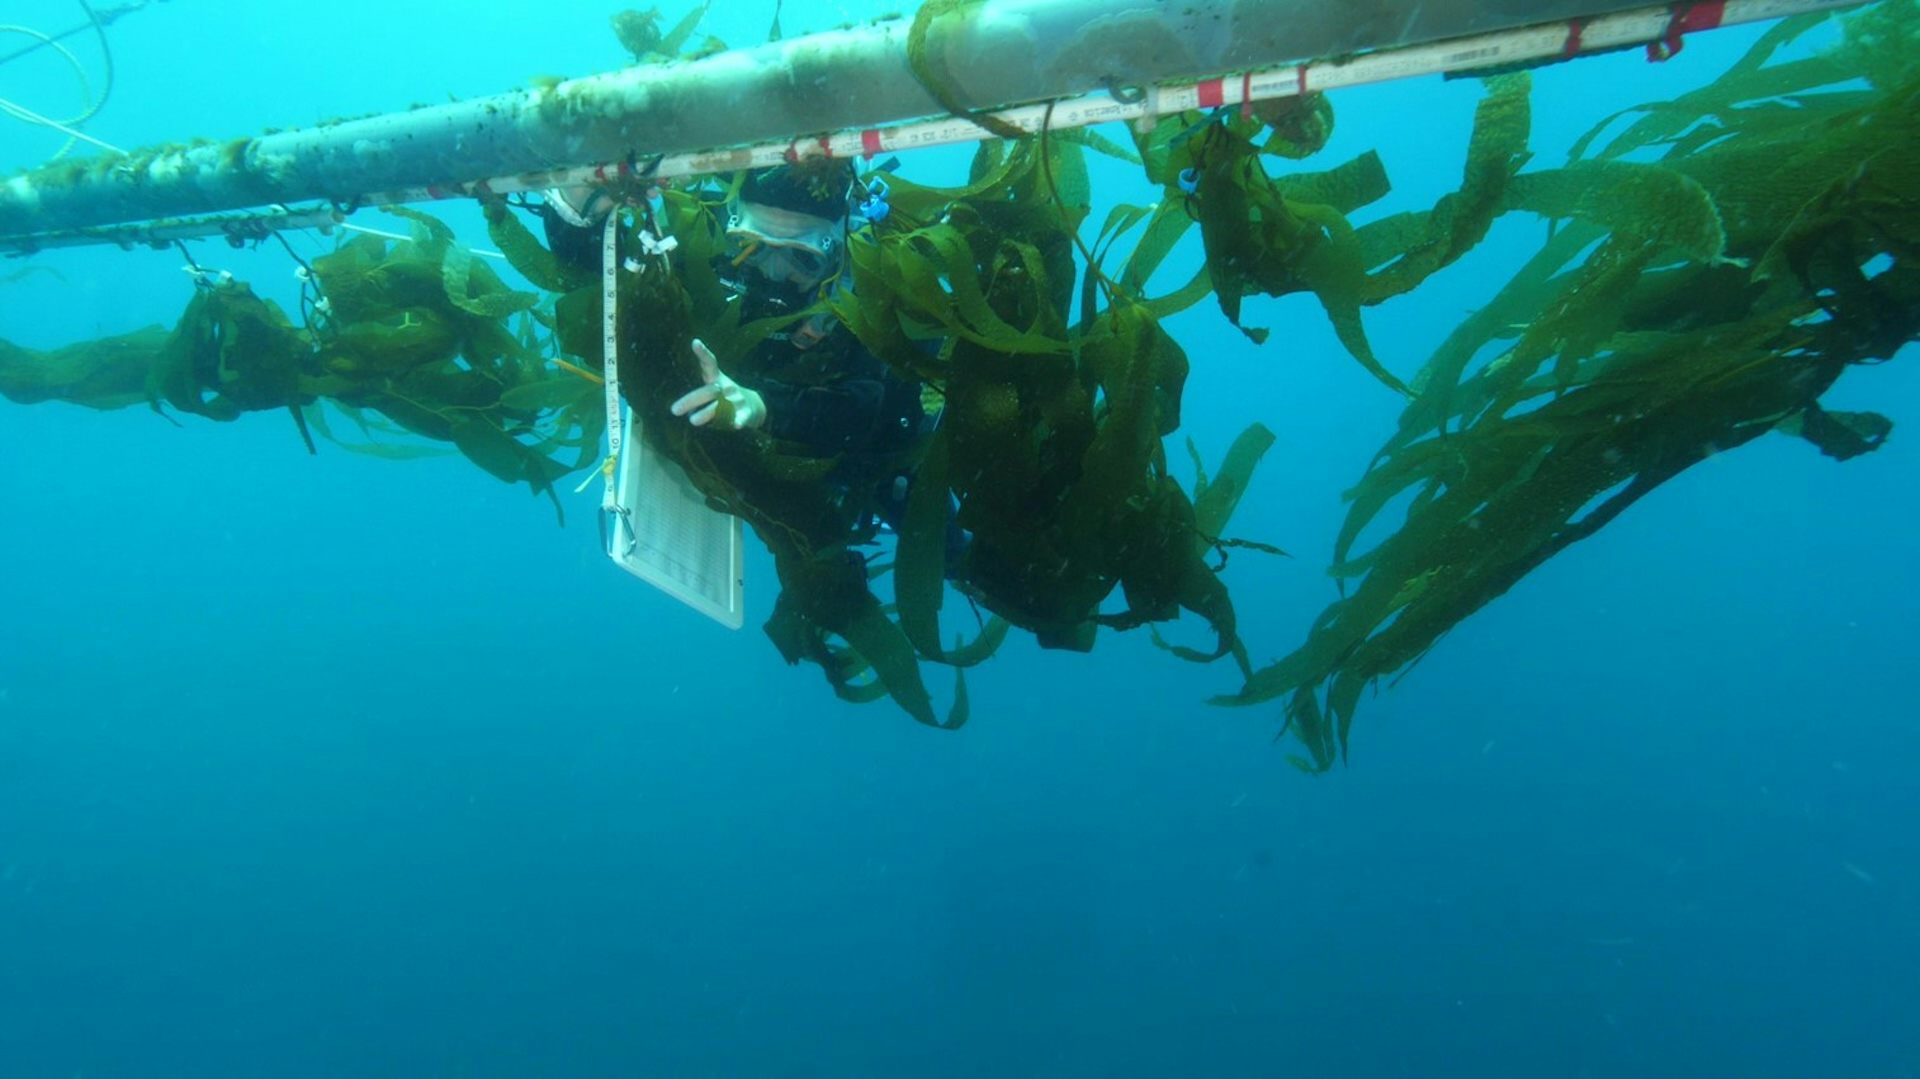 Scuba diver next to structure in open ocean water with kelp attached to it.